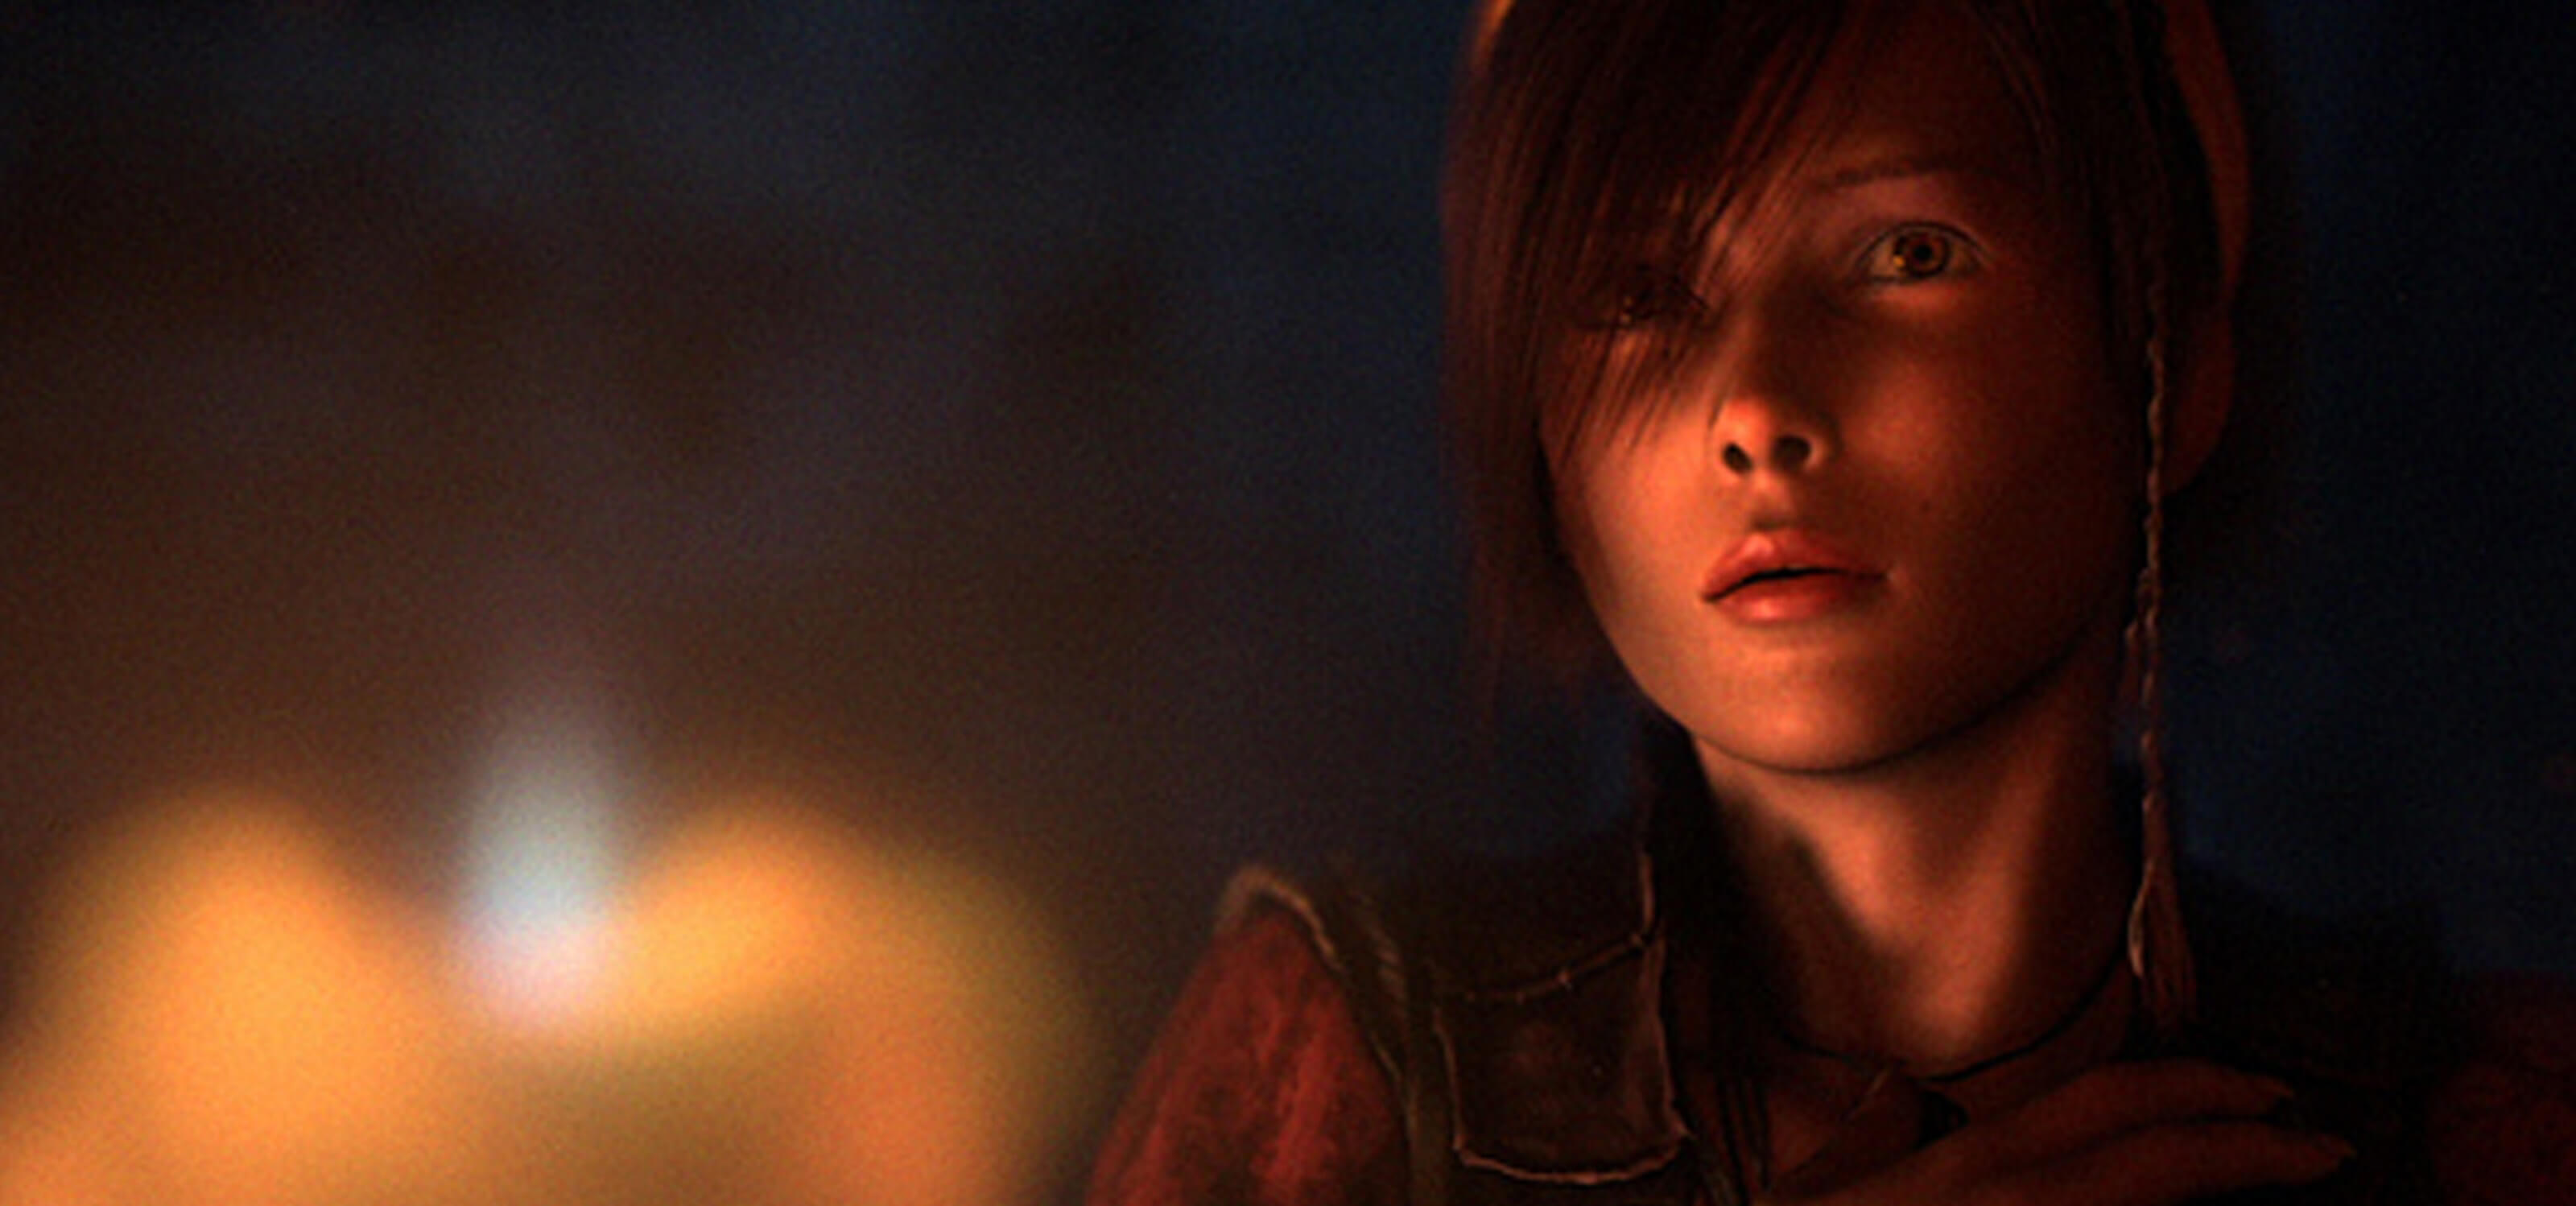 Screenshot of Leah, a character in Blizzard Entertainment's video game Diablo 3